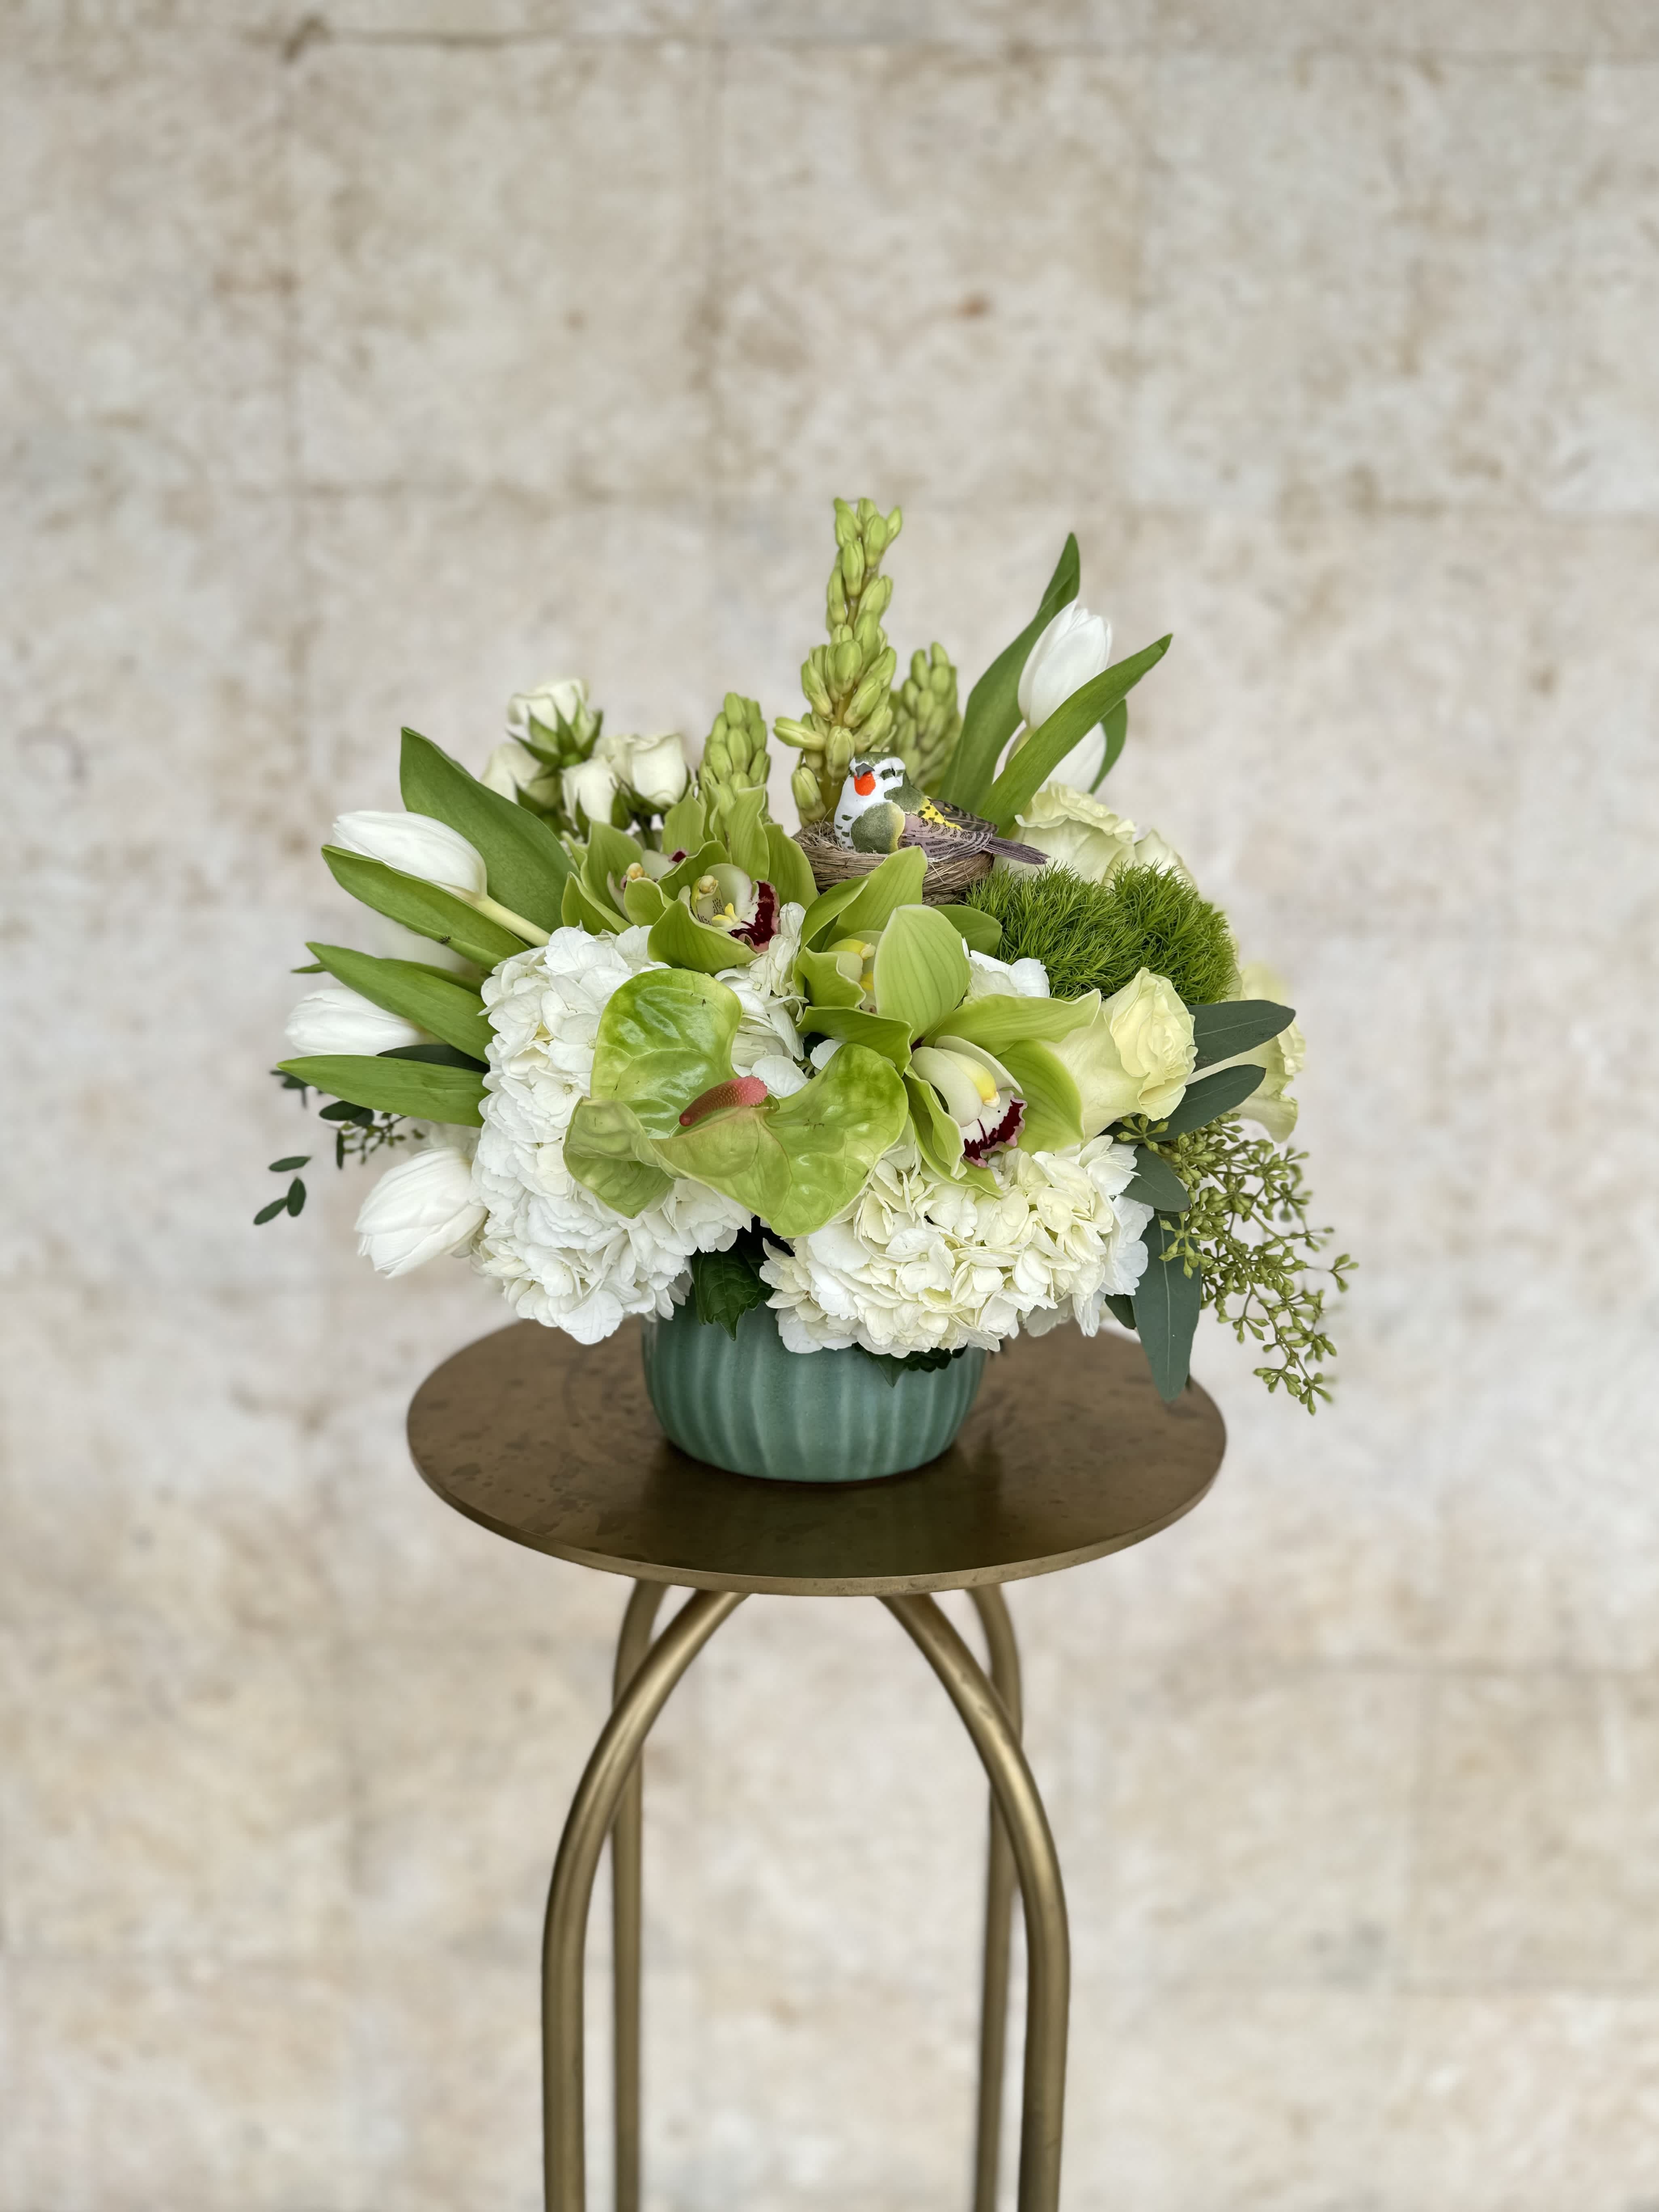 Evergreen Elegance - The beauty of spring flowers! Bring a little spring into your home with a unique flower arrangement. 